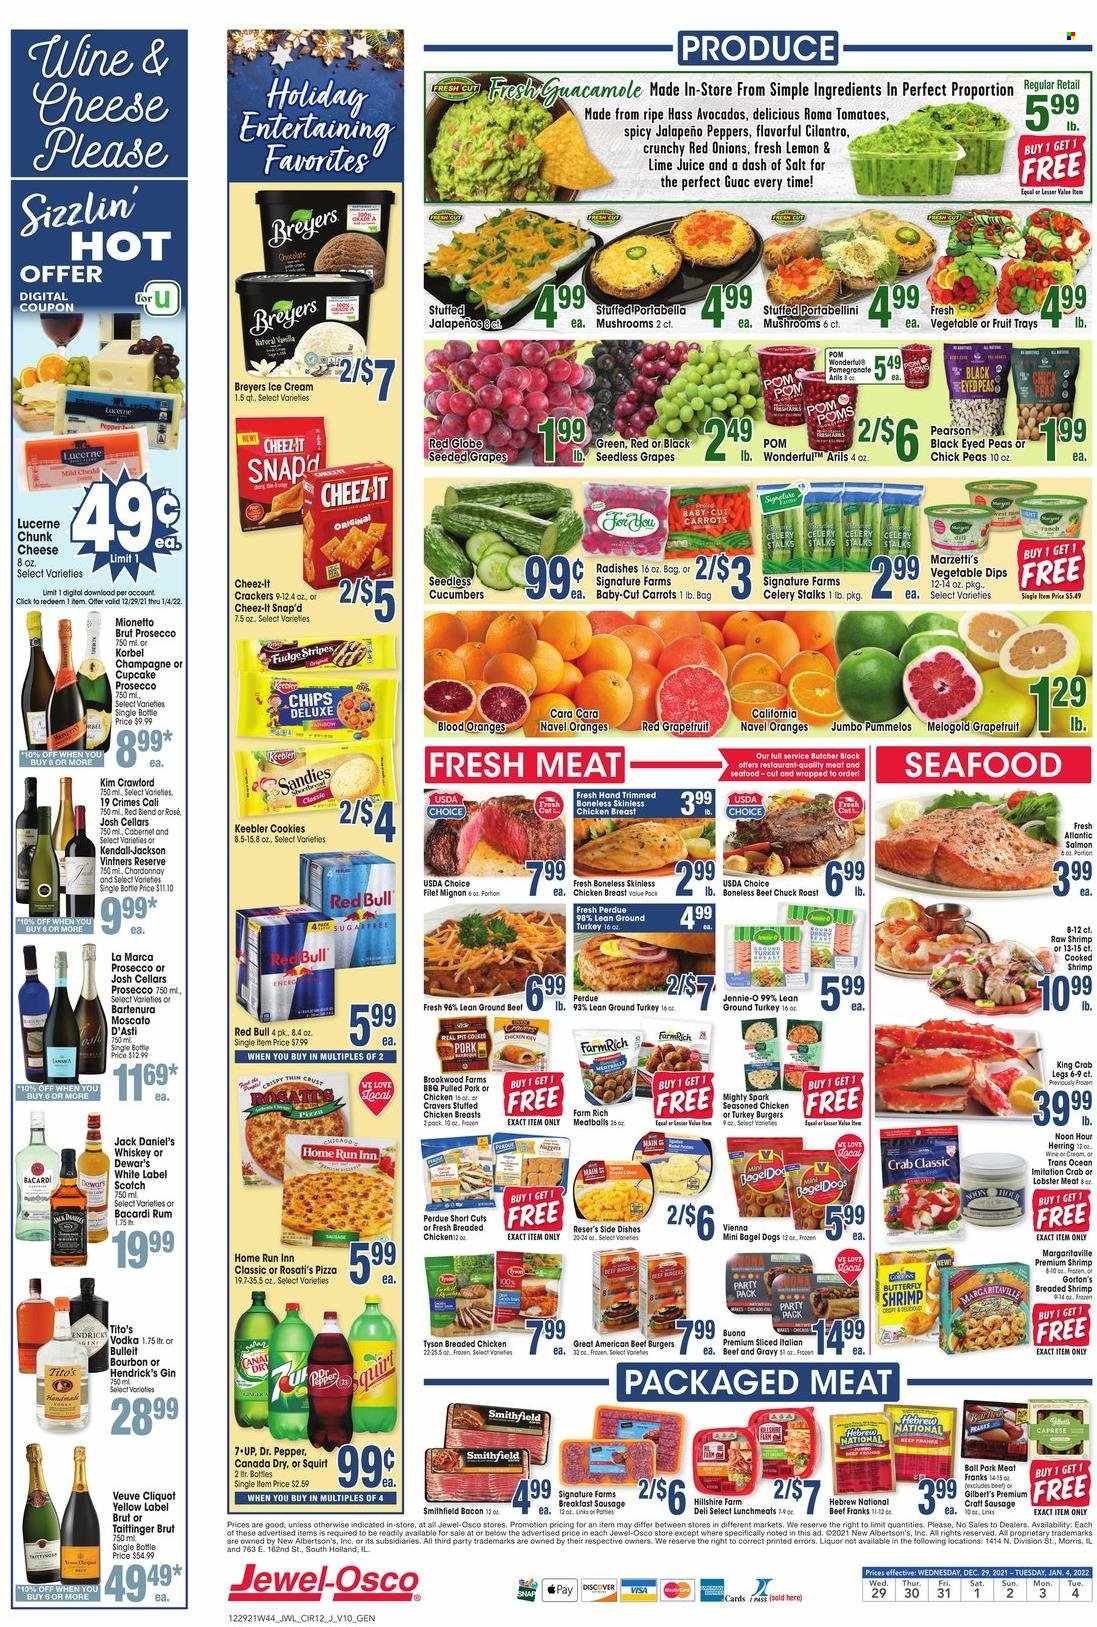 thumbnail - Jewel Osco Flyer - 12/29/2021 - 01/04/2022 - Sales products - seedless grapes, red onions, jalapeño, sleeved celery, avocado, grapefruits, grapes, Red Globe, oranges, lobster, salmon, herring, king crab, seafood, crab legs, crab, shrimps, Gorton's, Jack Daniel's, pizza, meatballs, hamburger, beef burger, Perdue®, pulled pork, stuffed chicken, bacon, Hillshire Farm, Gilbert’s, lunch meat, chunk cheese, cookies, fudge, crackers, Keebler, chips, Cheez-It, salt, cilantro, Canada Dry, Dr. Pepper, 7UP, Red Bull, prosecco, Chardonnay, wine, Moscato, rosé wine, Bacardi, gin, rum, vodka, whiskey, Hendrick's, whisky, ground turkey, beef tenderloin, turkey burger, pork meat, pomegranate, navel oranges. Page 12.